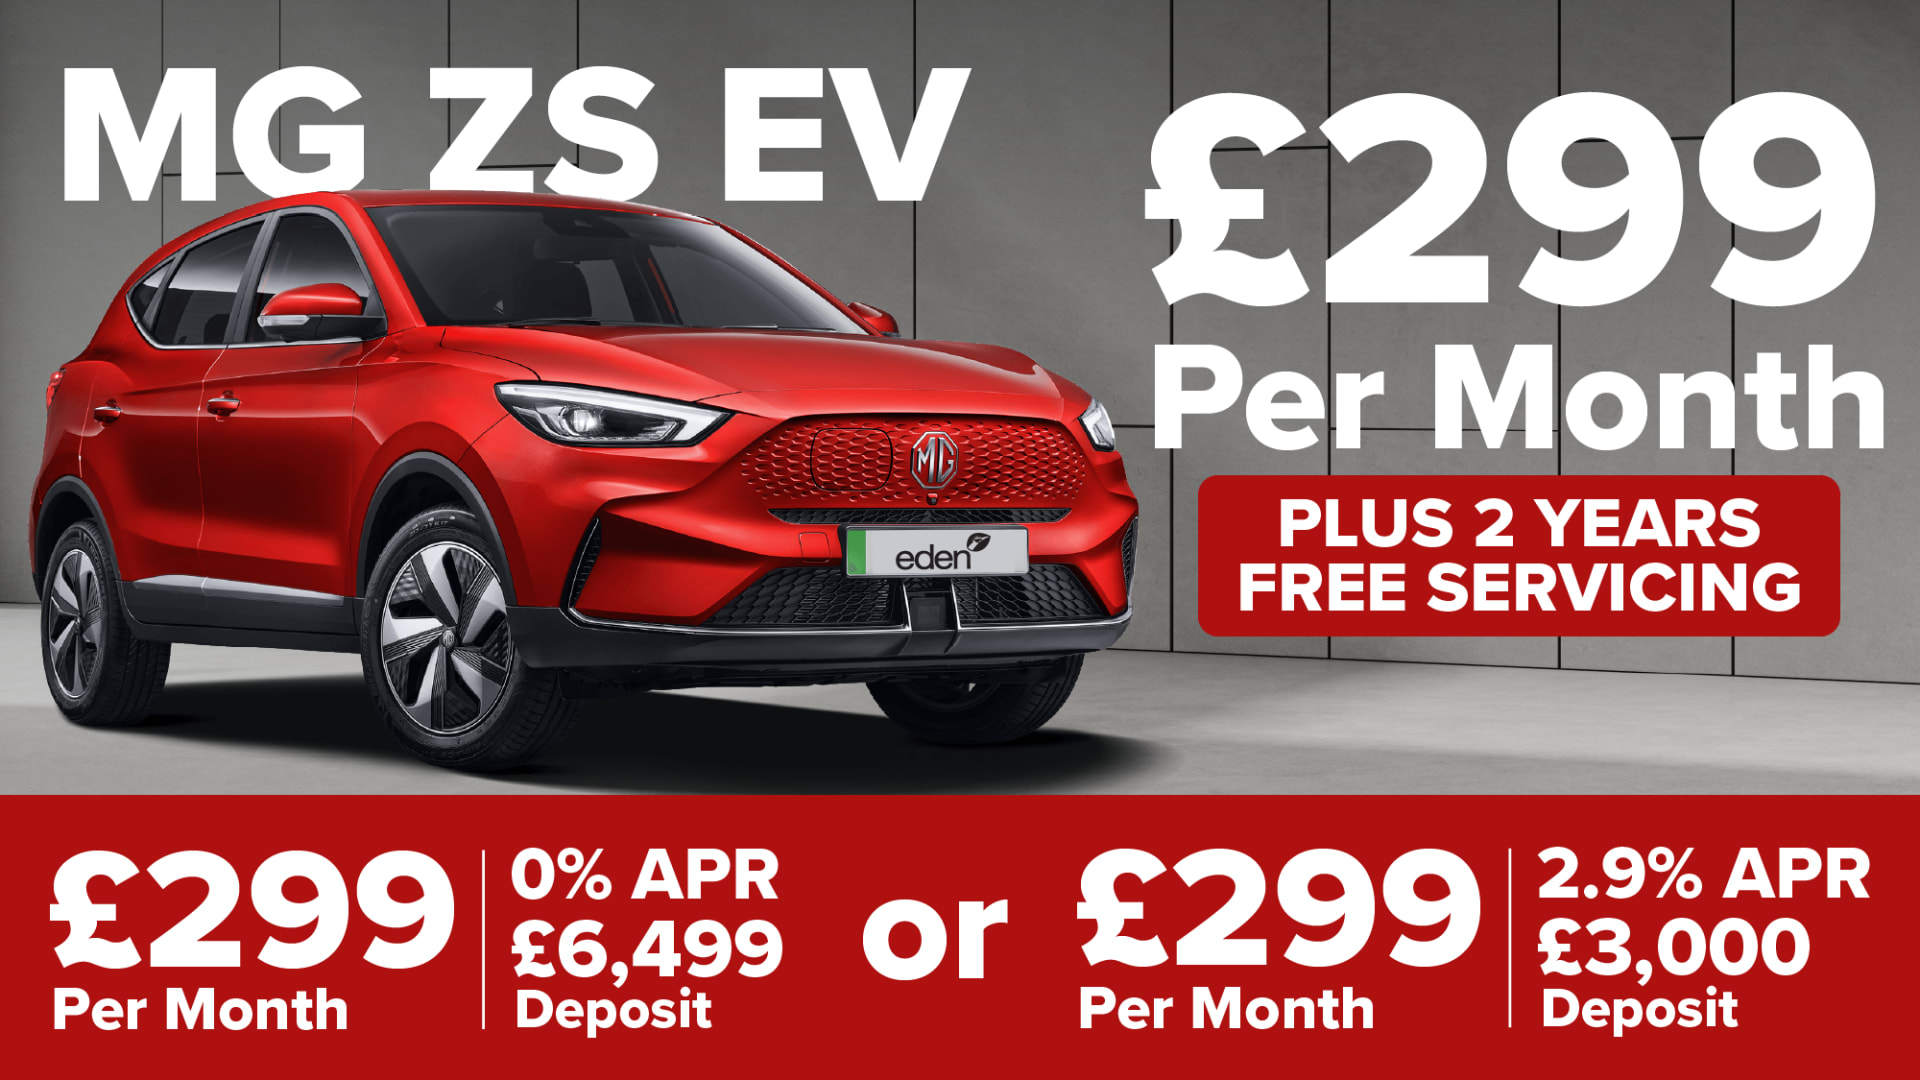 MG ZS EV CHOOSE YOUR OFFER